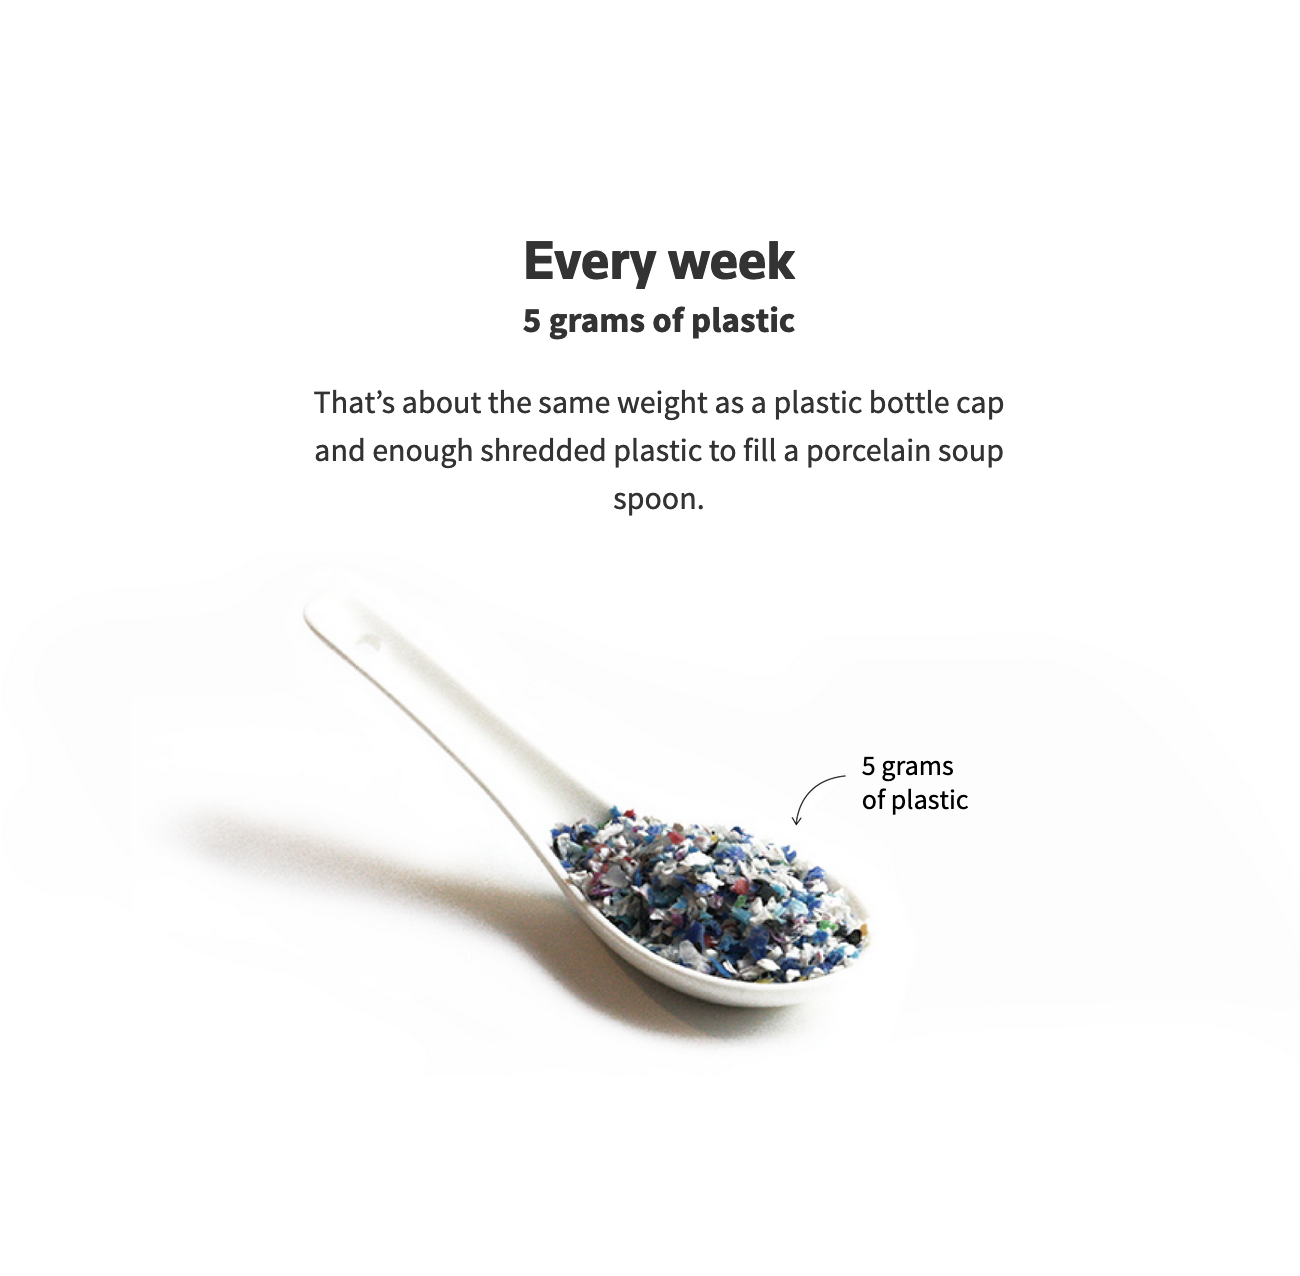 A photo of a spoon full of plastic, the amount we consume of it every week